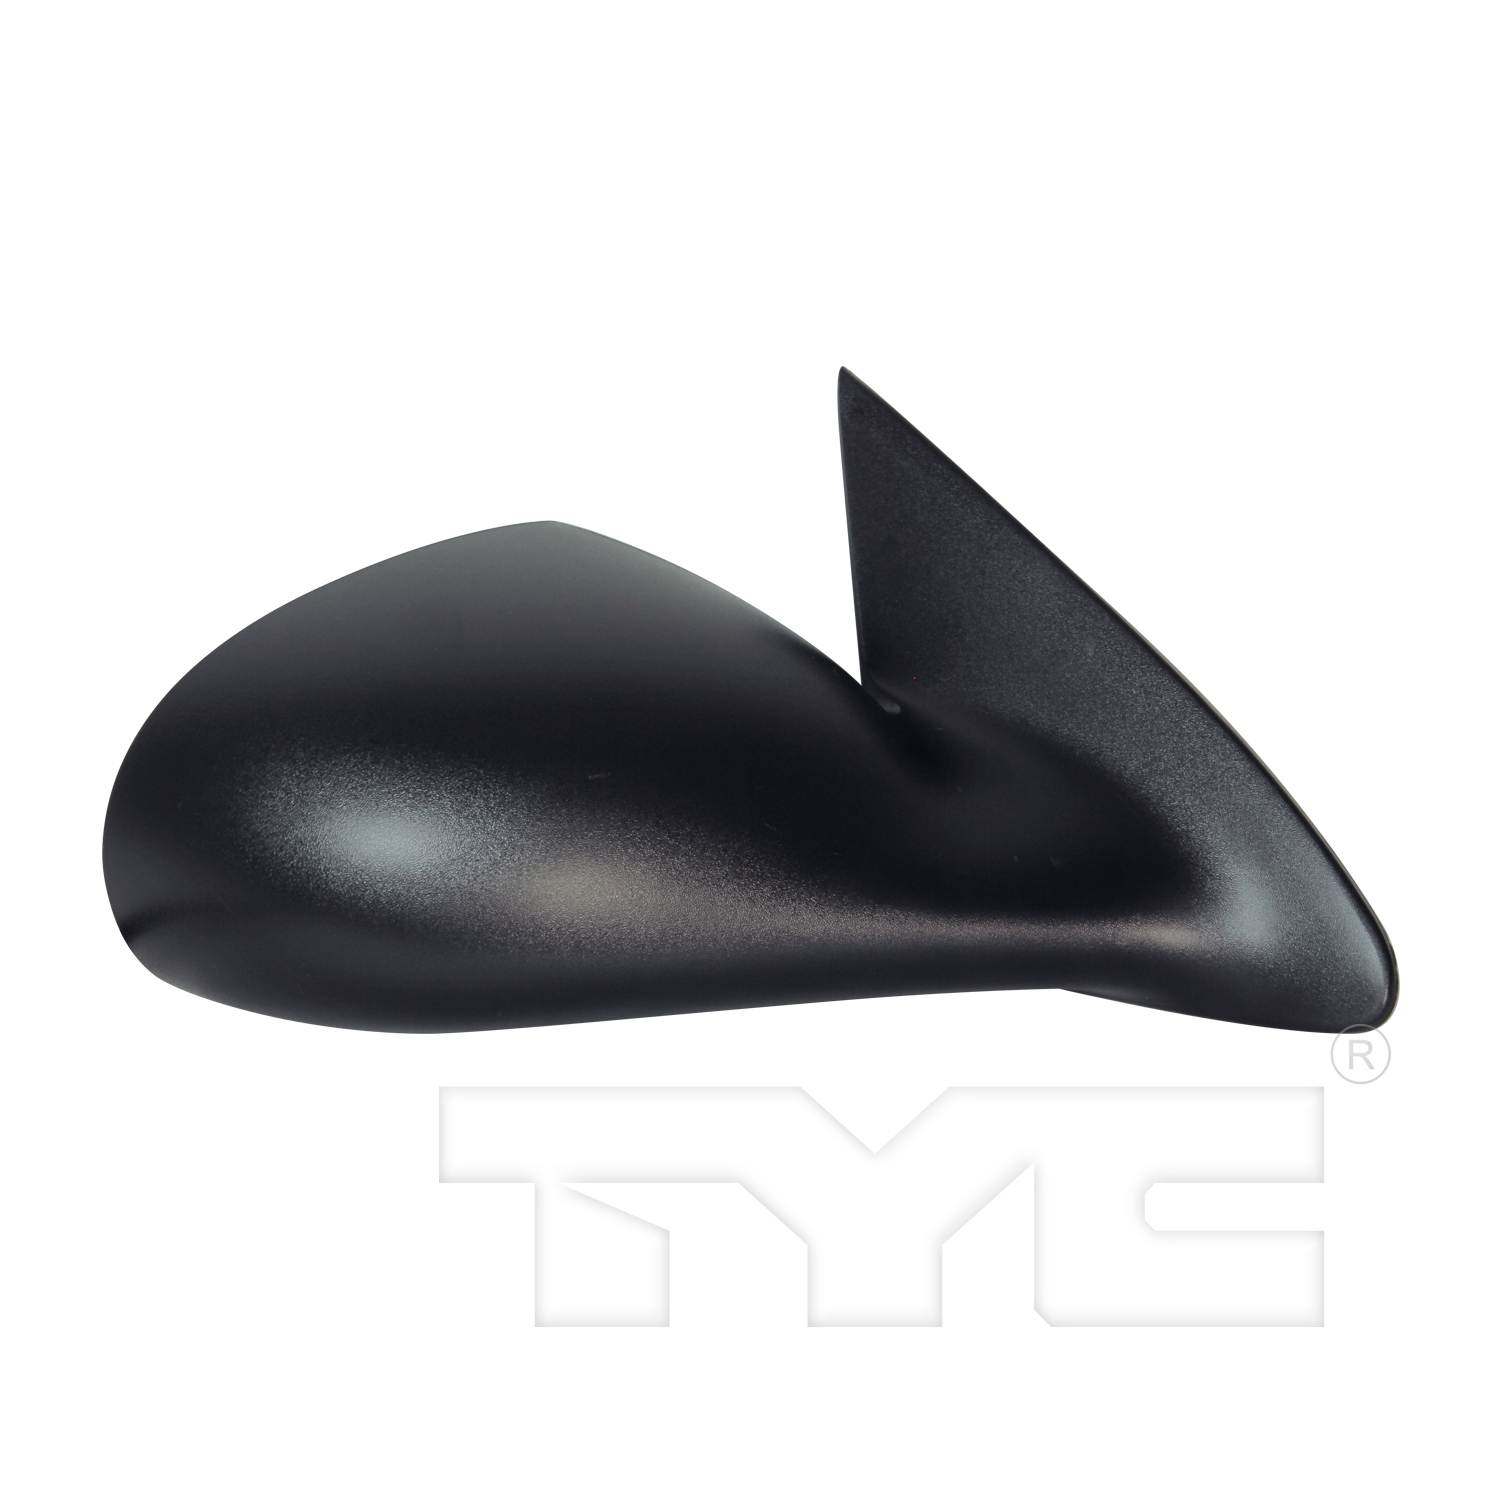 Aftermarket MIRRORS for CHRYSLER - CONCORDE, CONCORDE,98-00,RT Mirror outside rear view